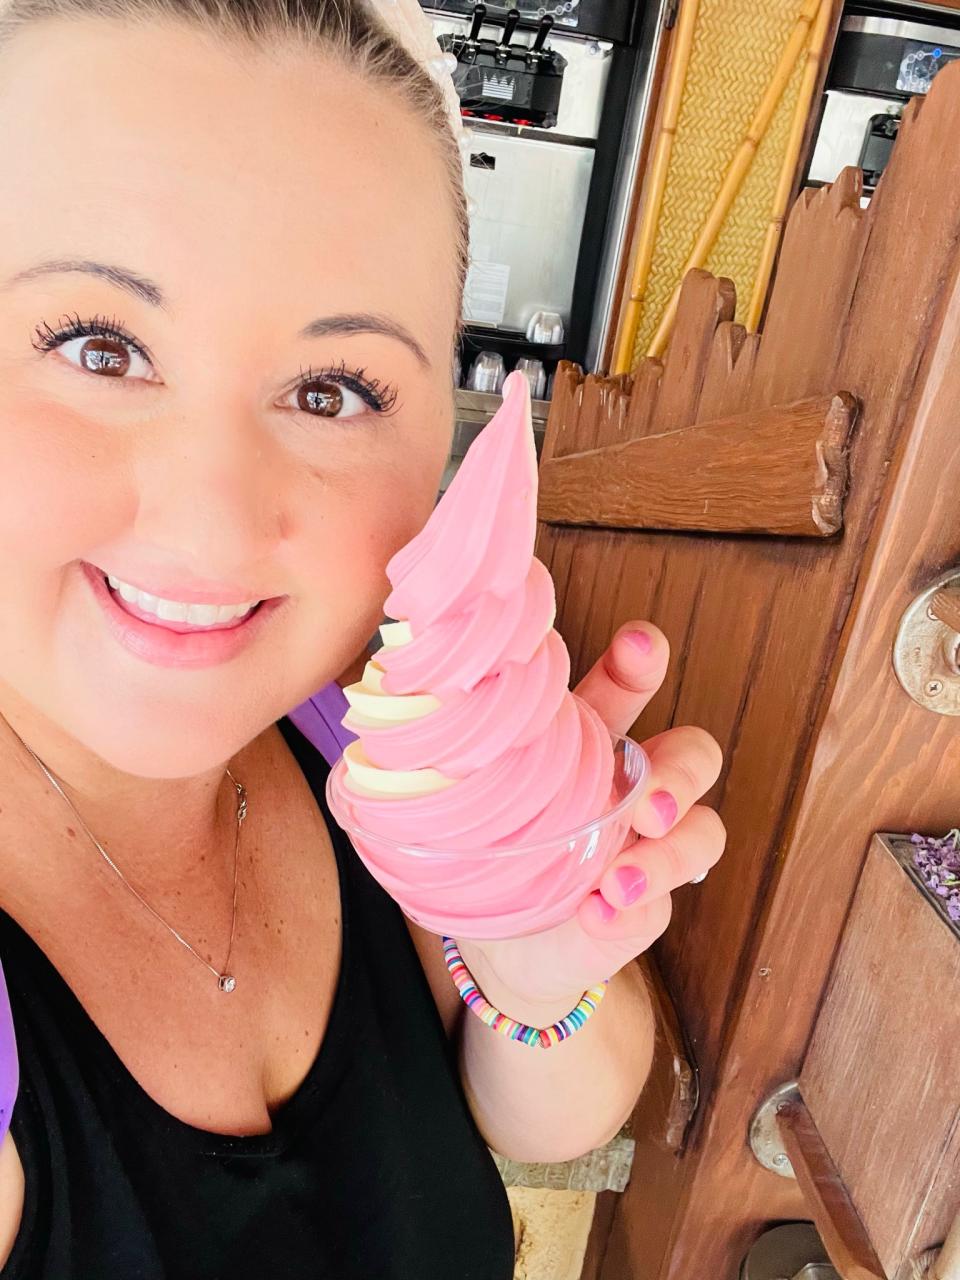 If you prefer to spend your Disney dollars on inexpensive snacks like the classic Dole Whip, the cuisine aboard the Wish may be lost on you. (Photo: Carly Caramanna)